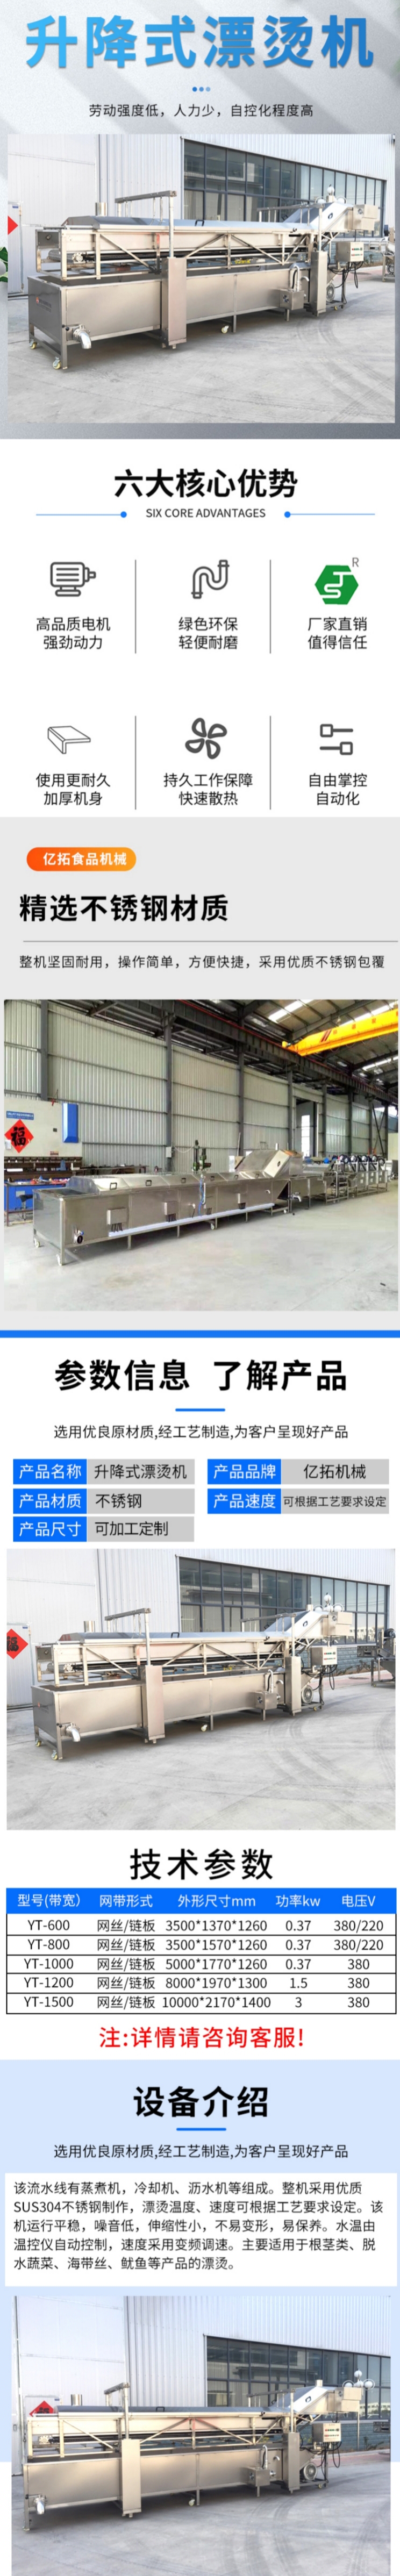 Bamboo Shoot Cooking Machine Hand Peeling Bamboo Shoot Processing Equipment Clean Vegetable Processing Line Yituo Manufacturing